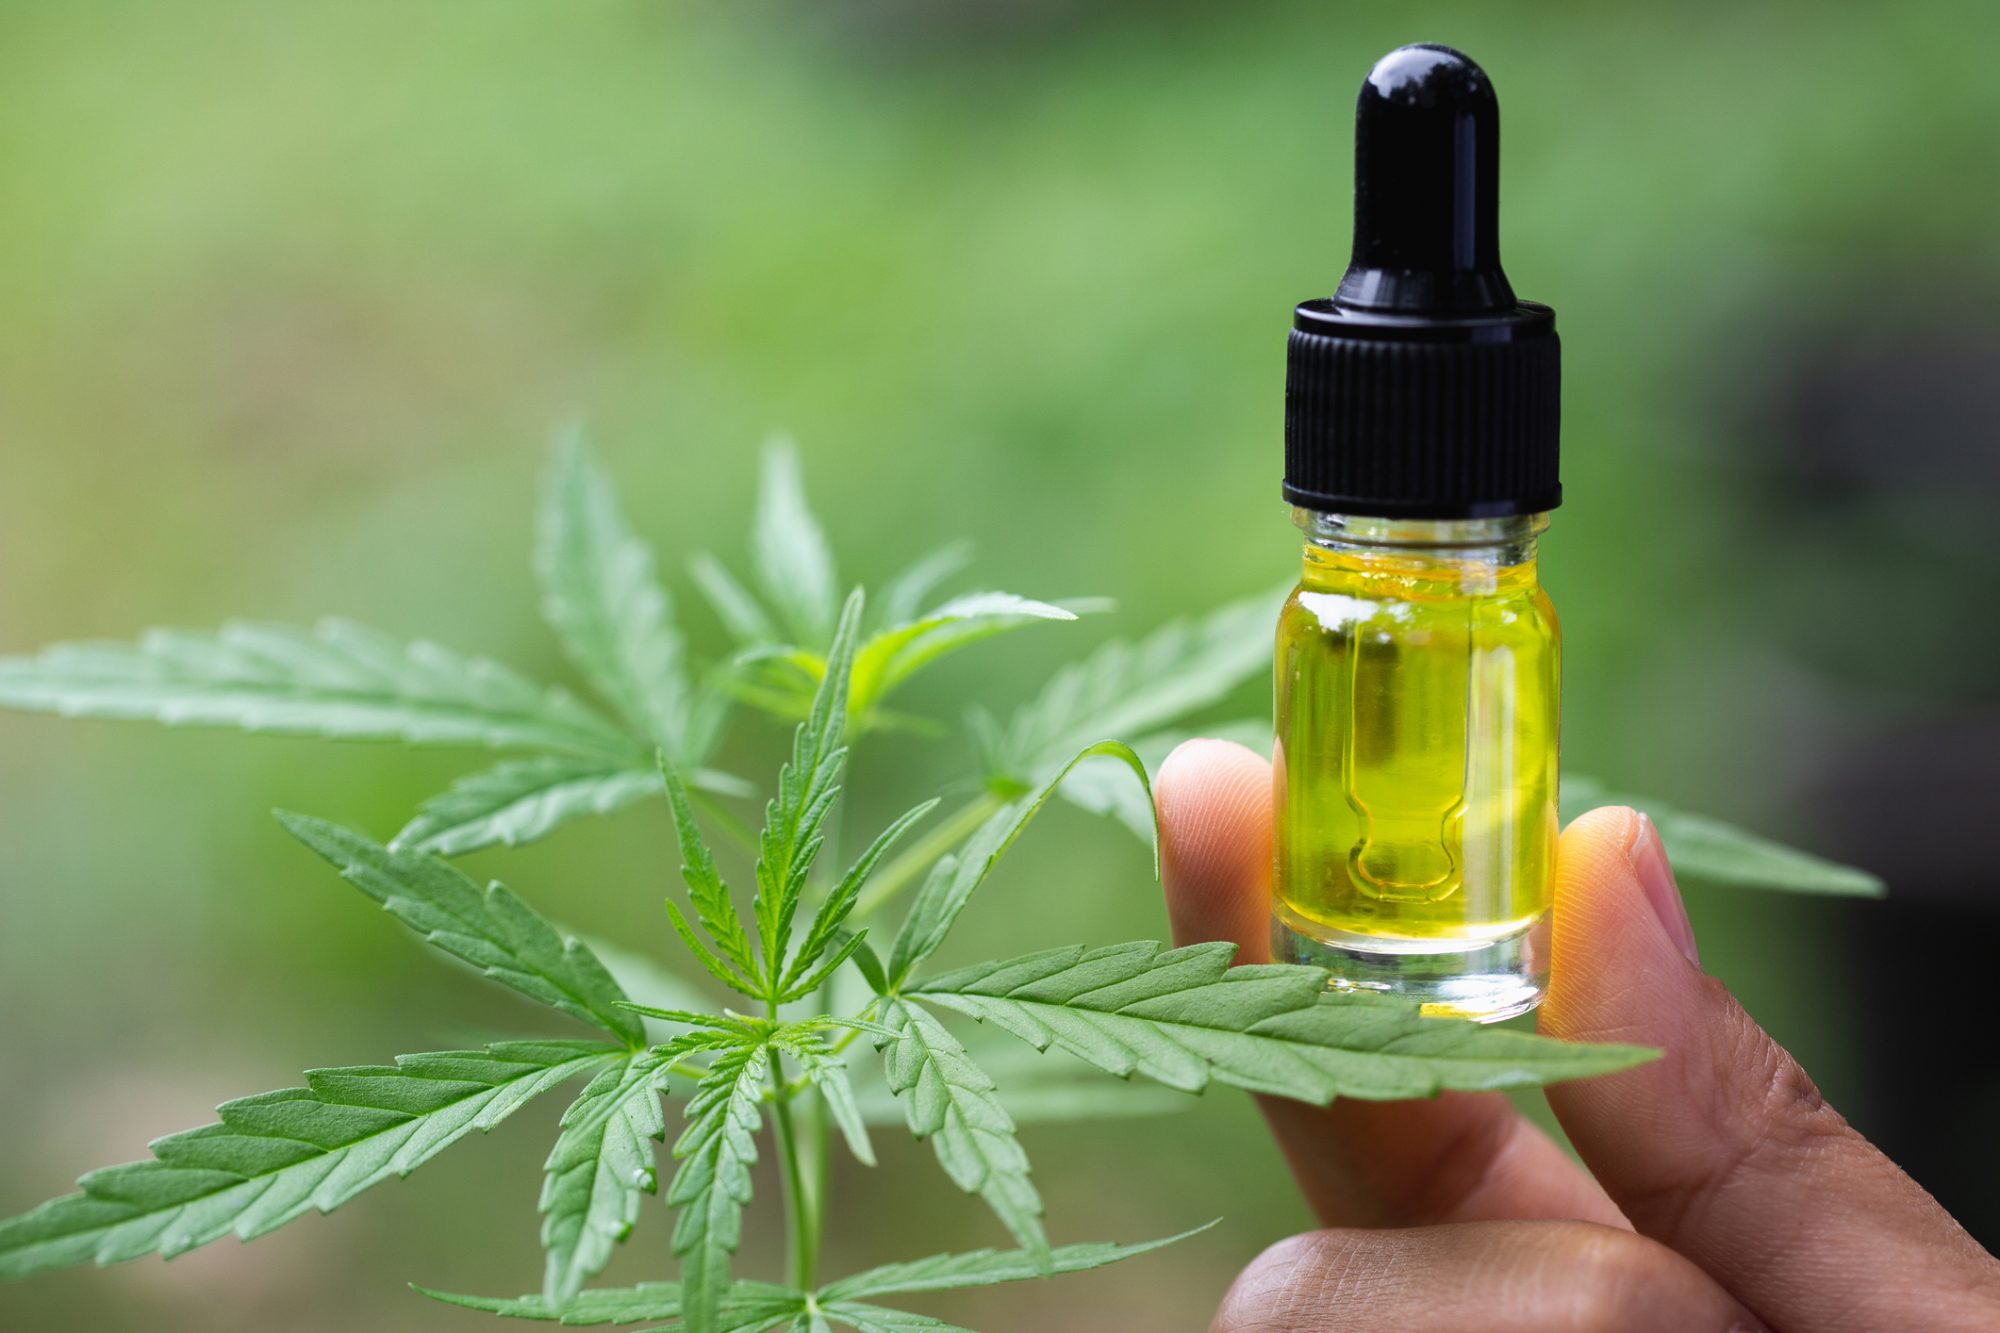 Rules and regulations for CBD oil in France